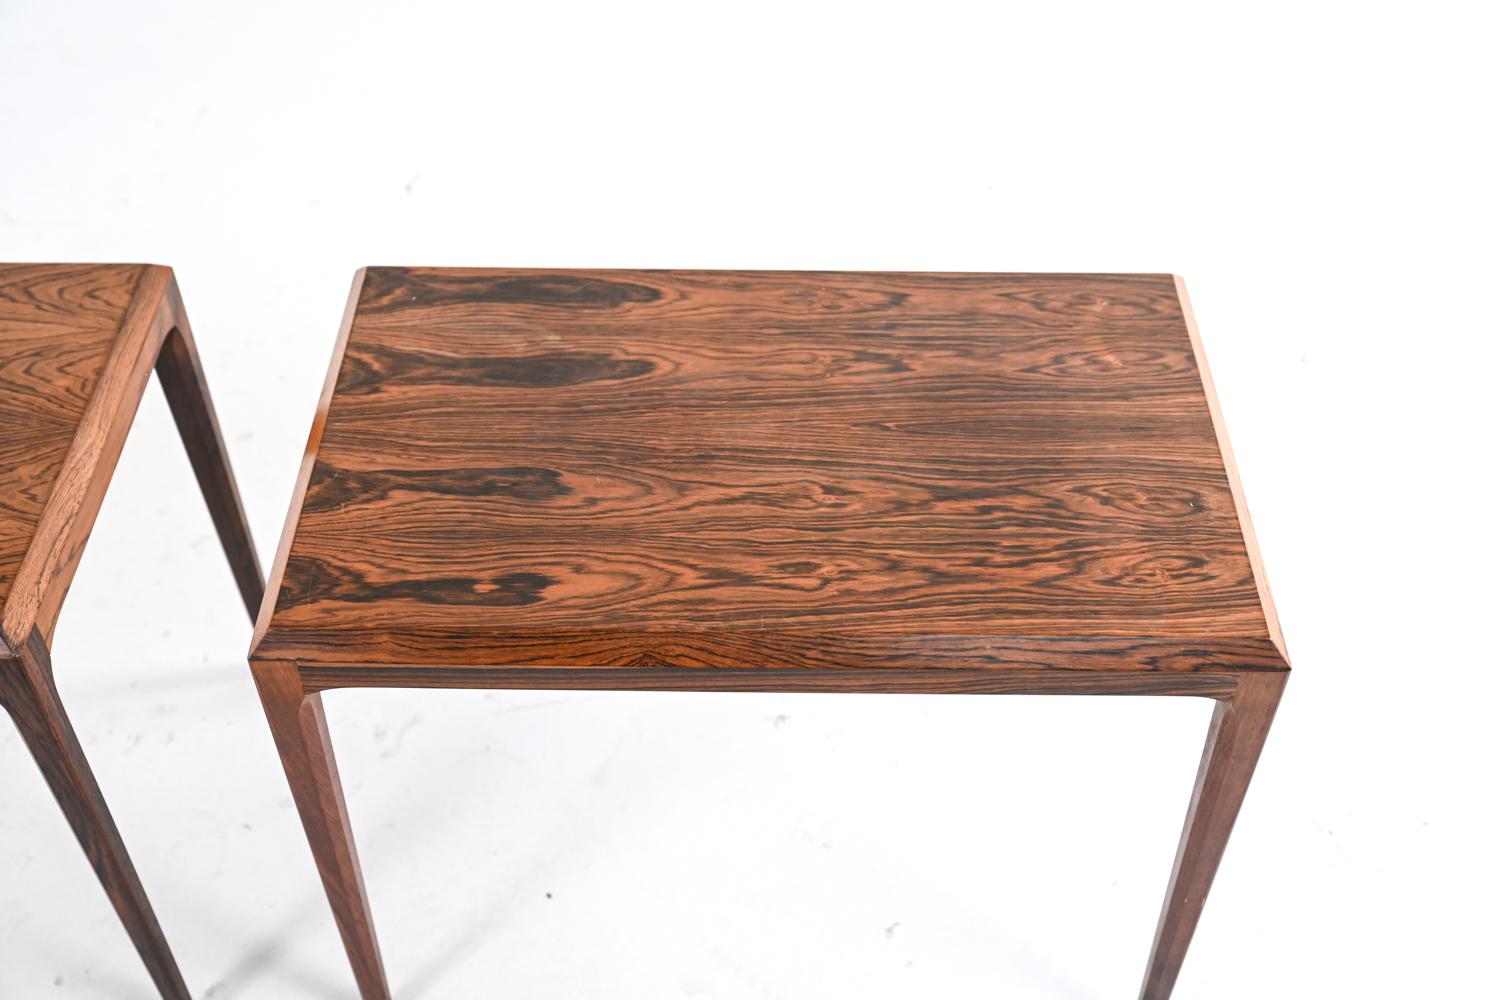 20th Century Pair of Rosewood Side Tables by Johannes Andersen for CFC Silkeborg, c. 1960's